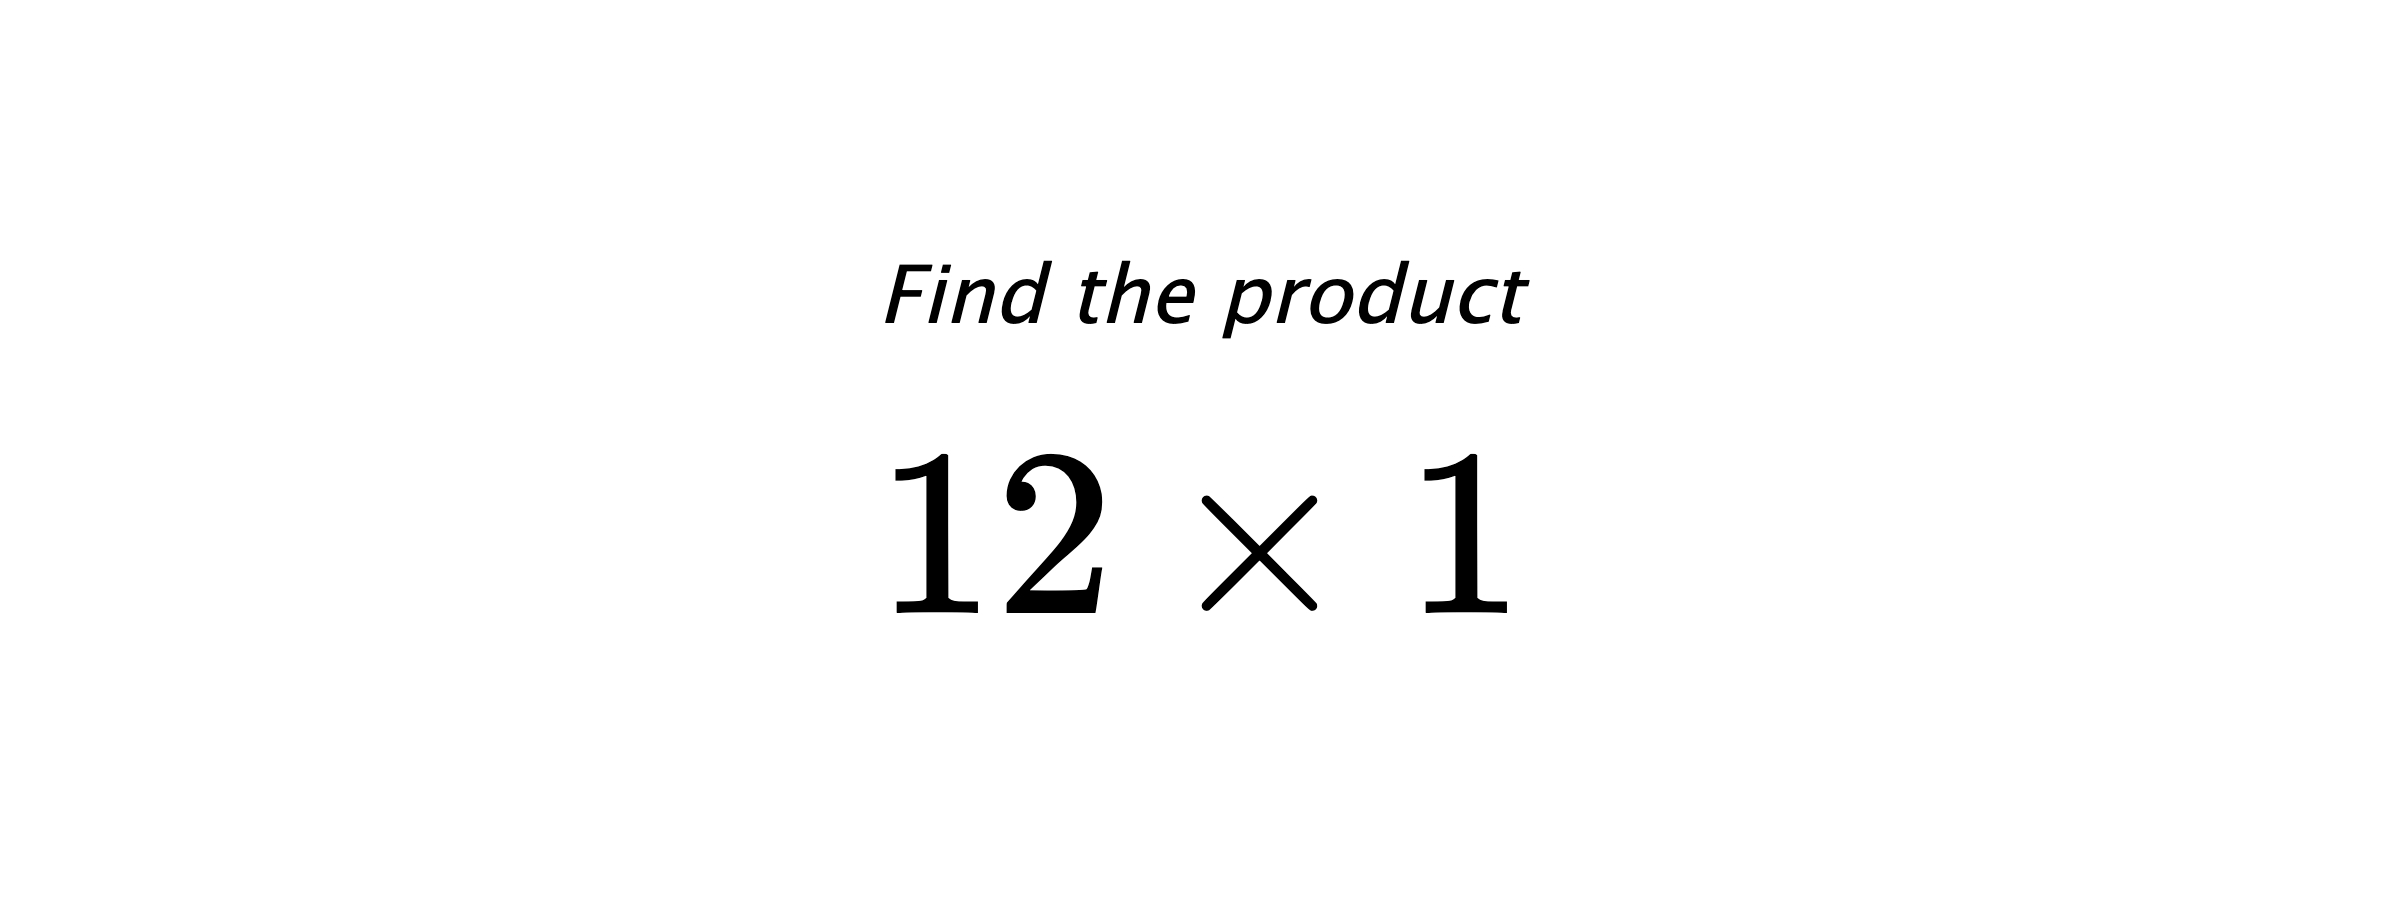 Find the product $ 12 \times 1 $